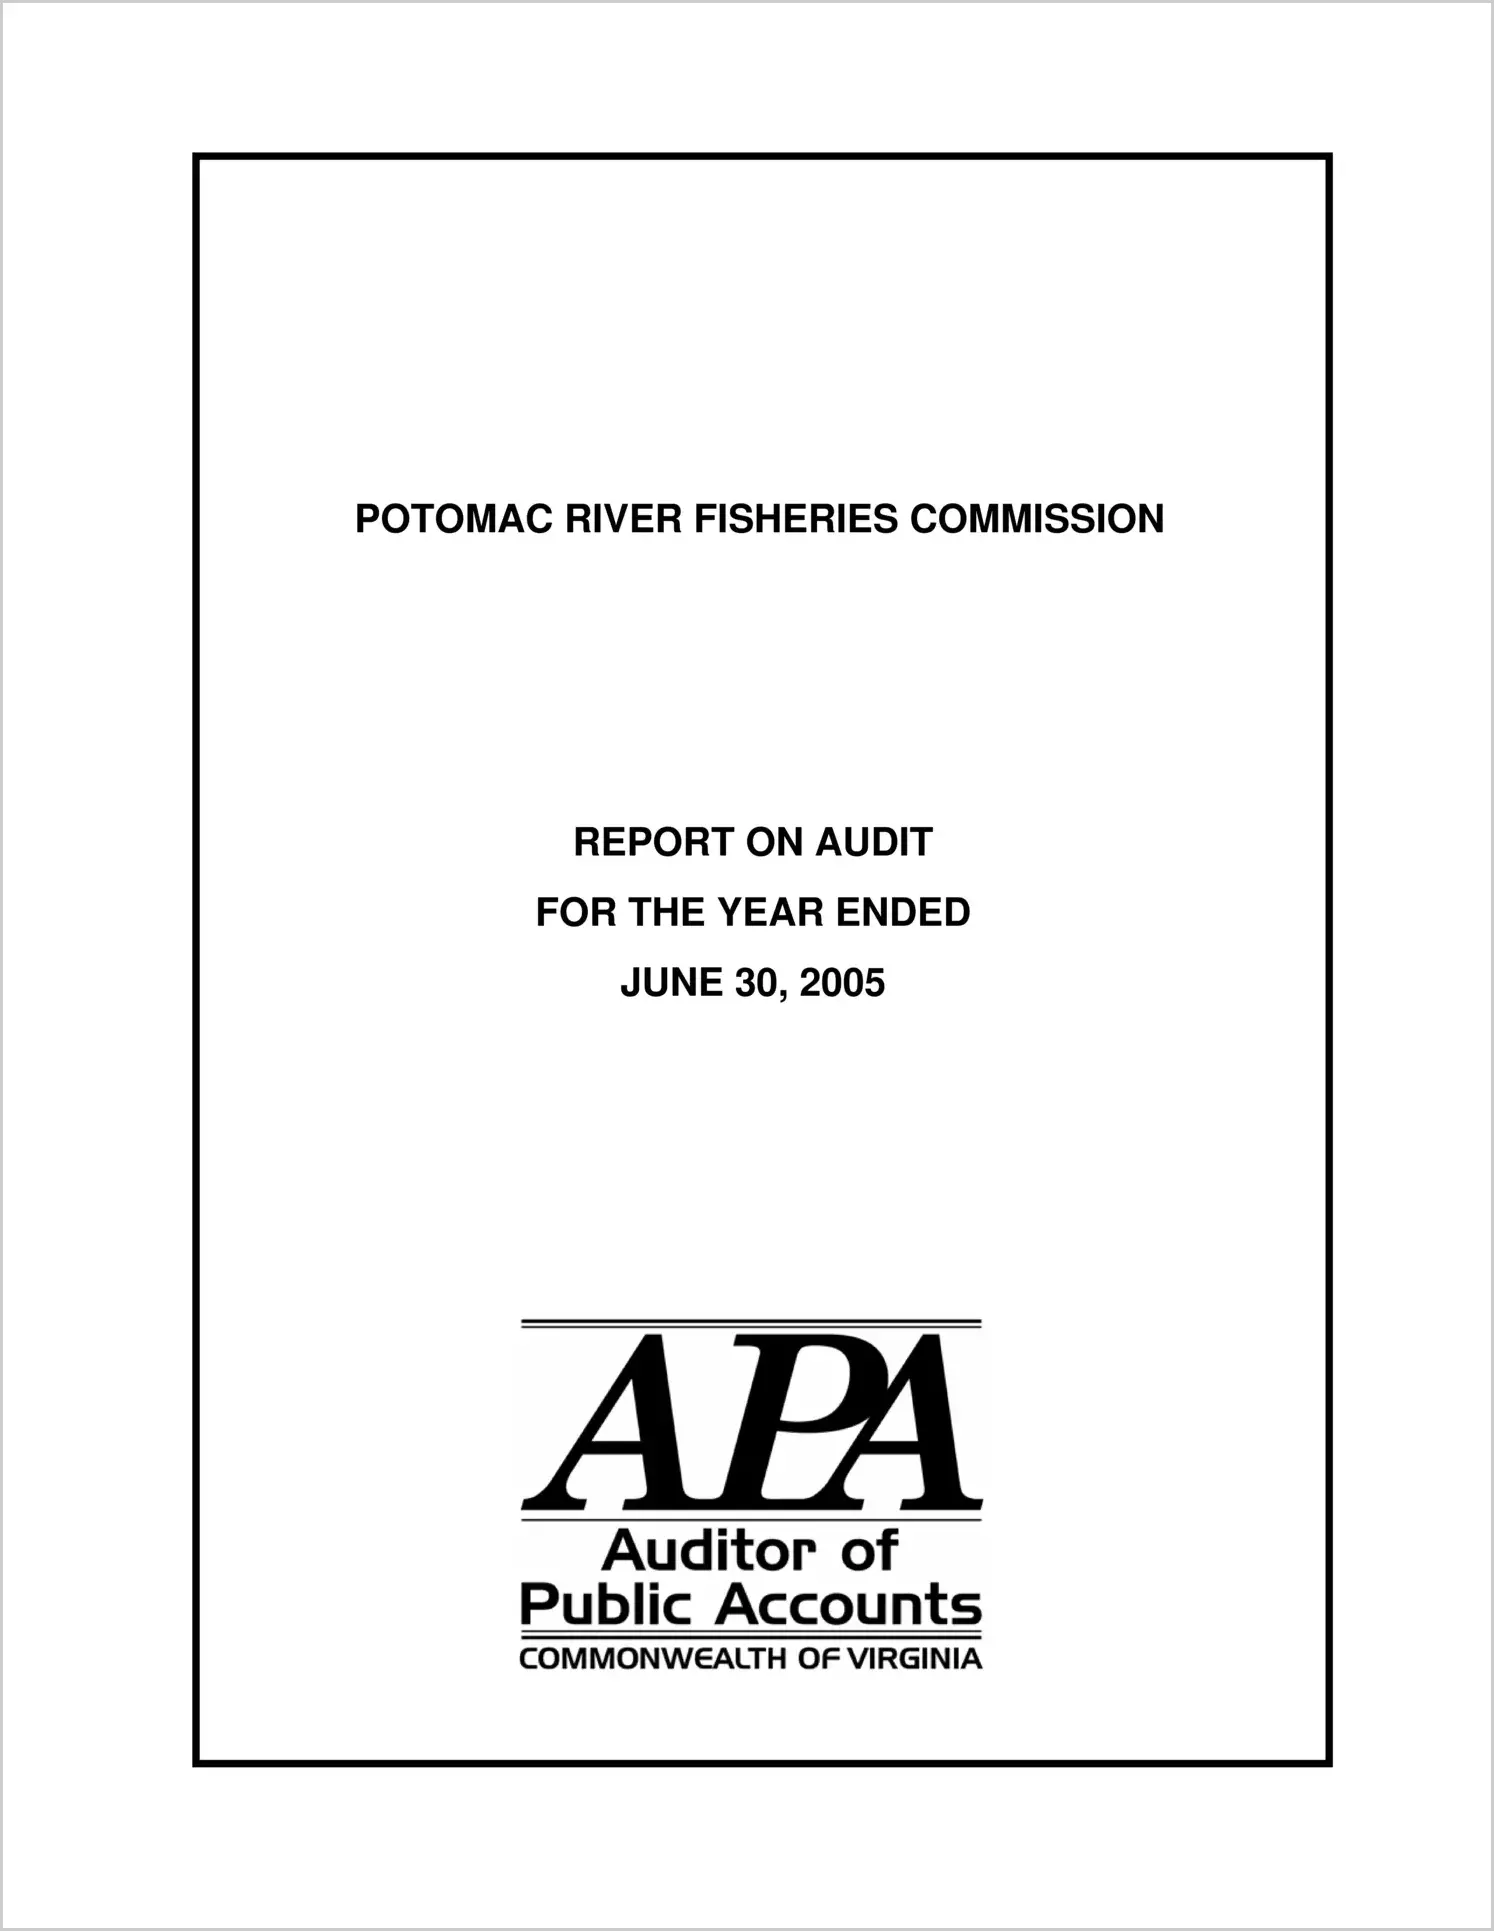 Potomac River Fisheries Commission for the year ended June 30, 2005